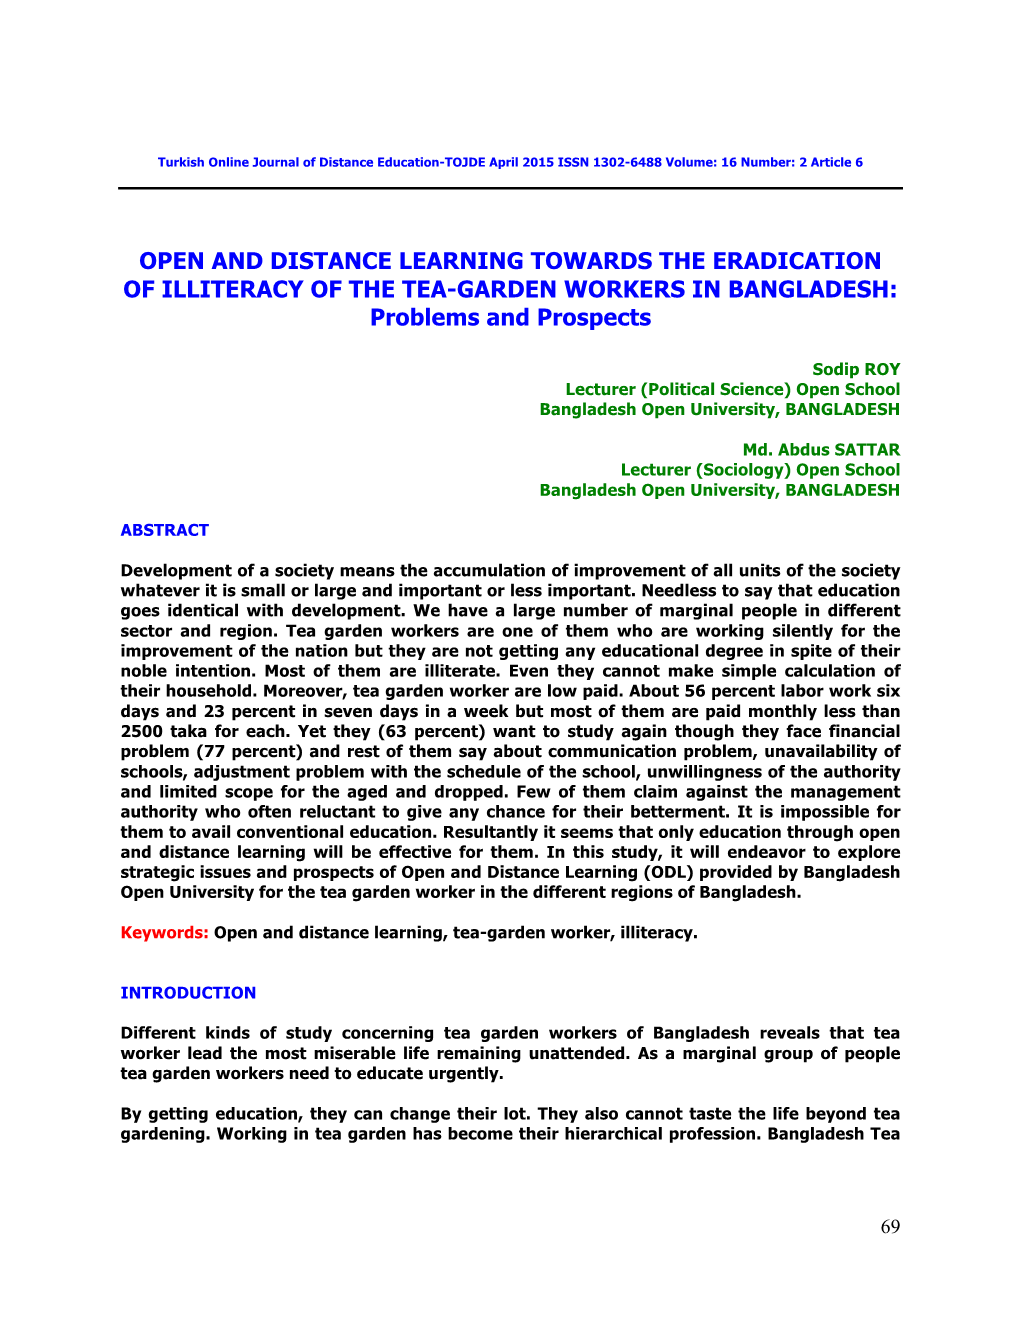 OPEN and DISTANCE LEARNING TOWARDS the ERADICATION of ILLITERACY of the TEA-GARDEN WORKERS in BANGLADESH: Problems and Prospects